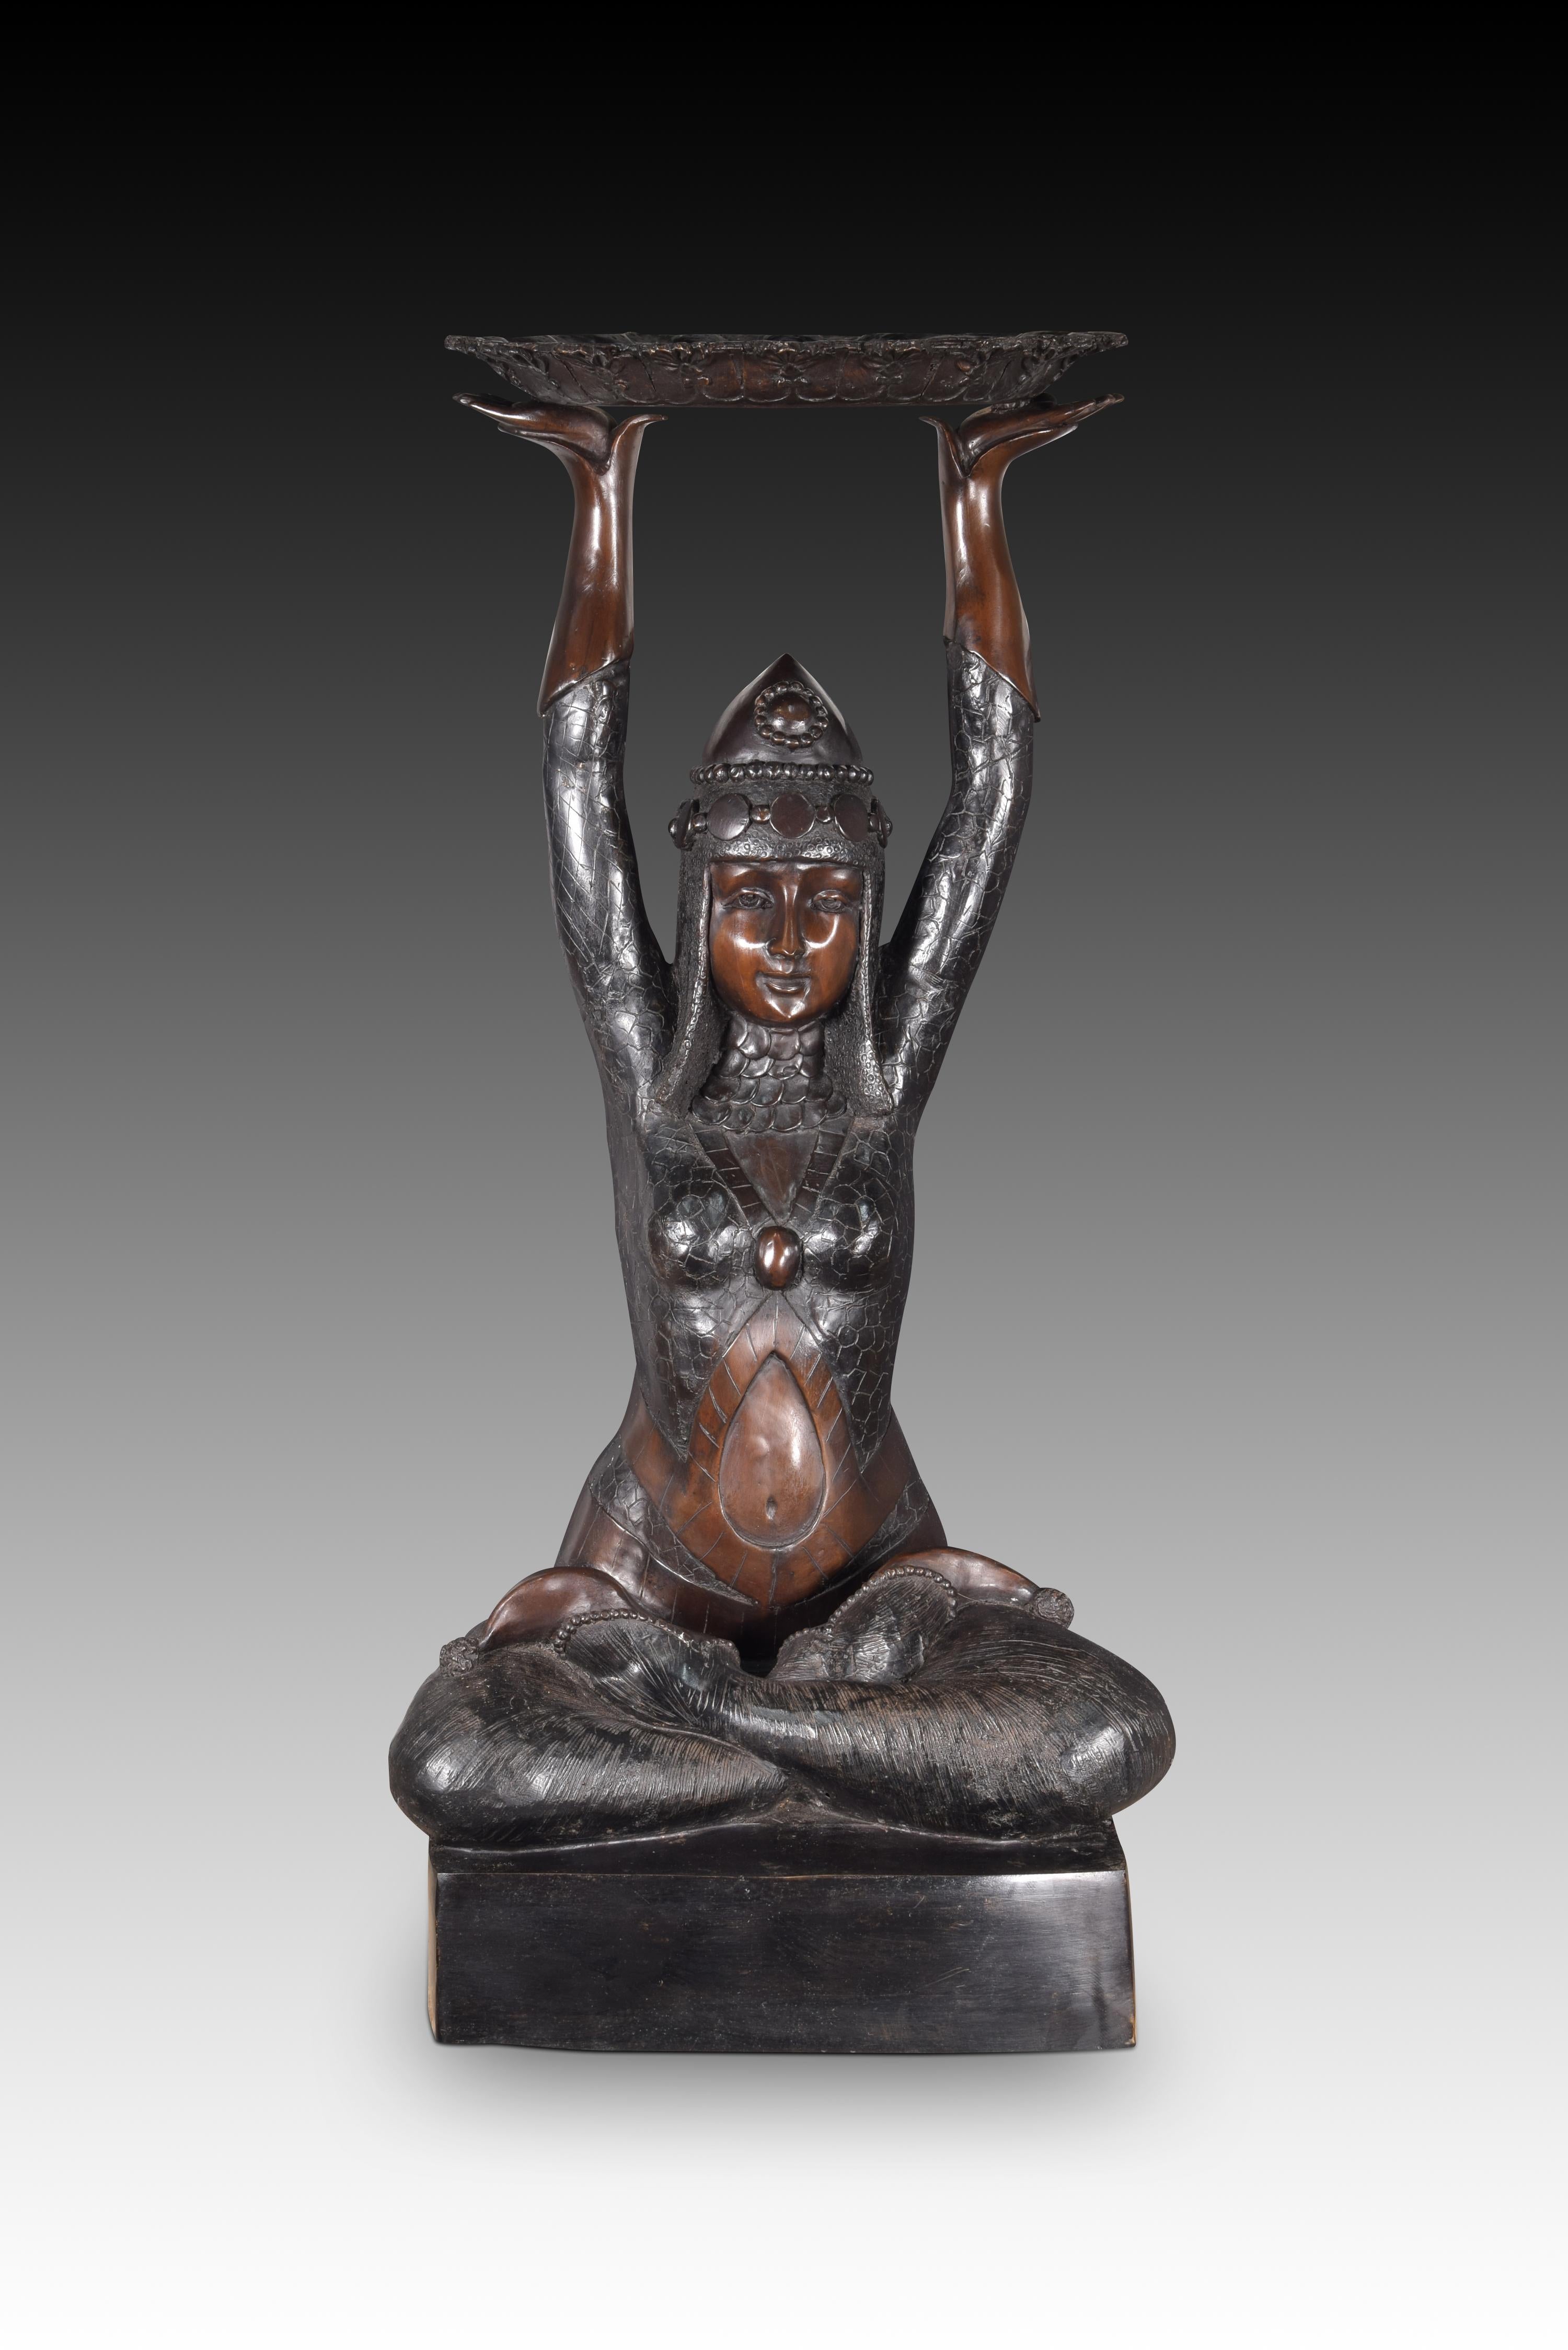 Seated offeror. Bronze. 20th century, following Art Deco models. 
Bronze sculpture of a young lady sitting with her feet crossed and raising both arms to hold aloft an oval tray. Her clothing (exotic, detailed, marking the figure...) and the posture